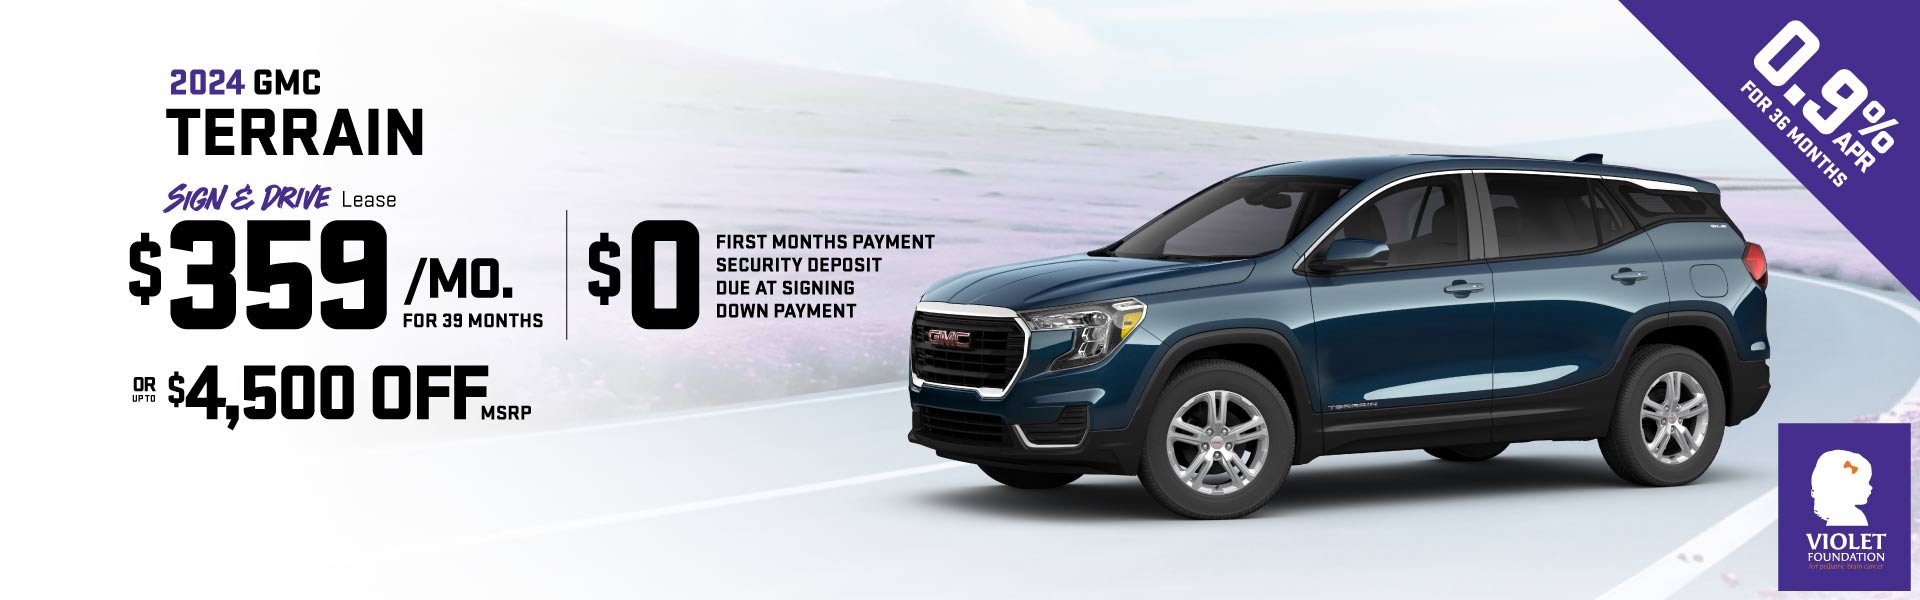 2024 GMC Terrain SLE AWD Sign & Drive Lease for $359/month f